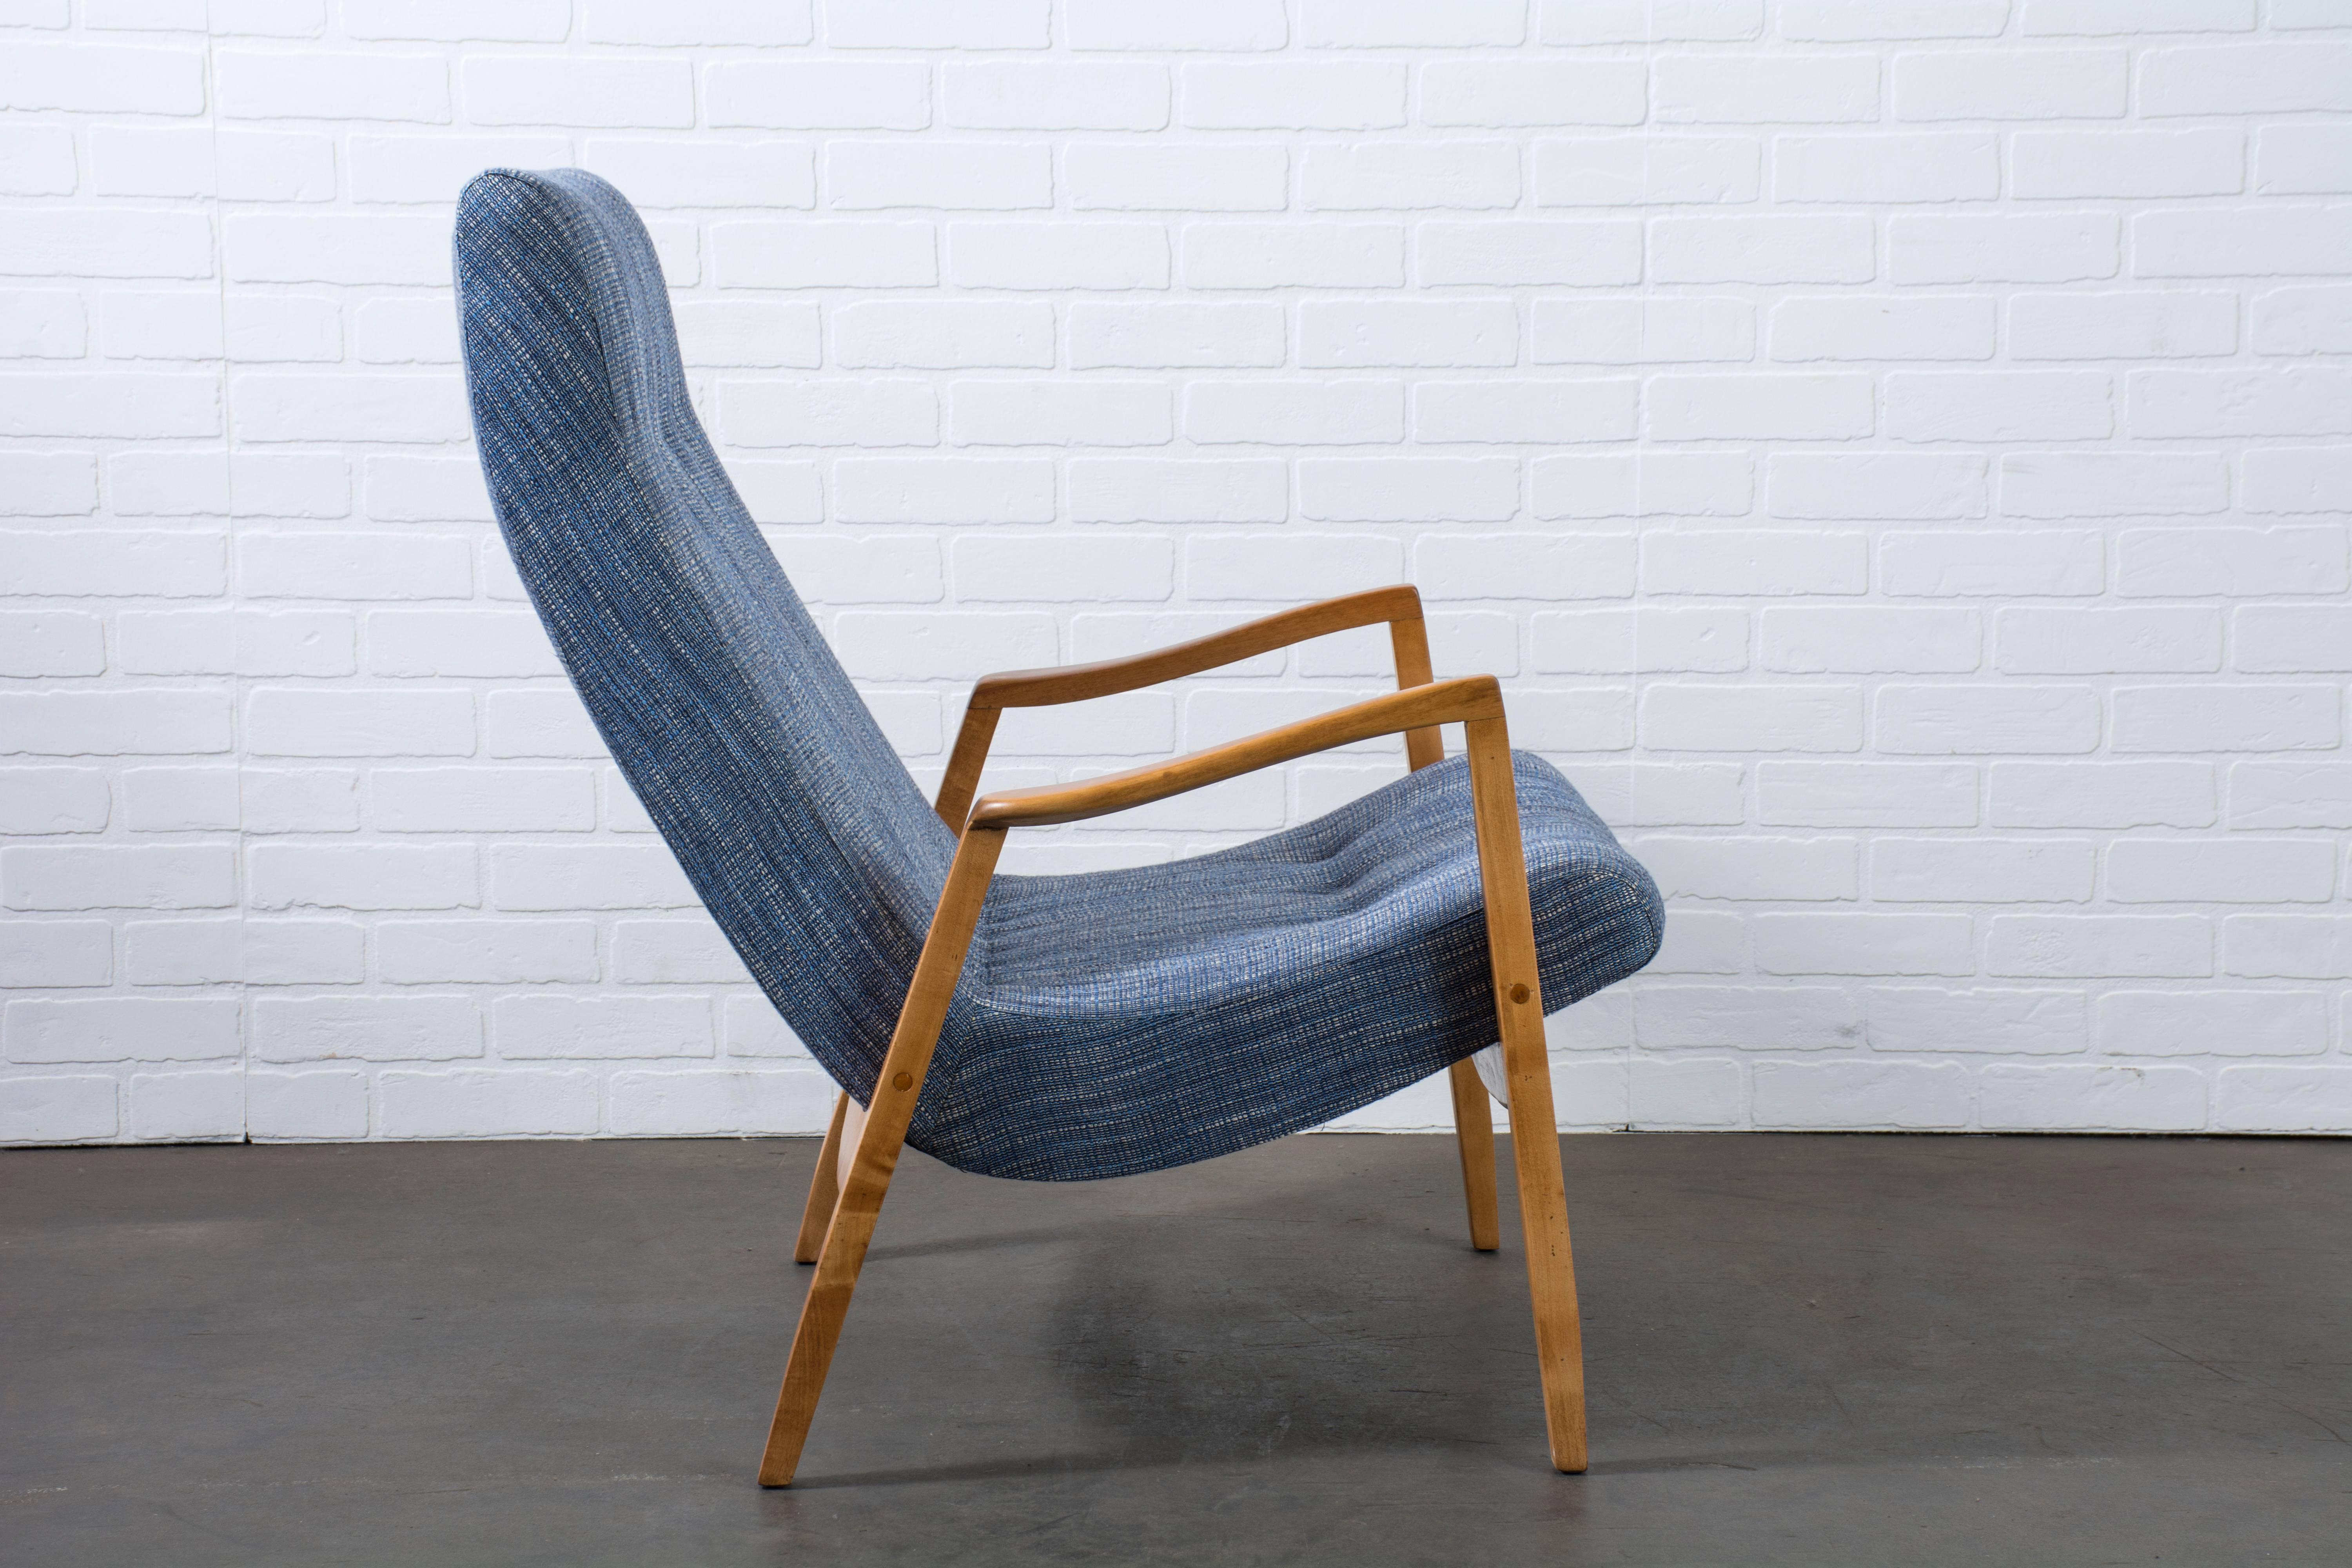 This Mid-Century Modern 'scoop' lounge chair was designed by Milo Baughman in the 1950s, USA. It features a sculptural wood frame and new upholstery.